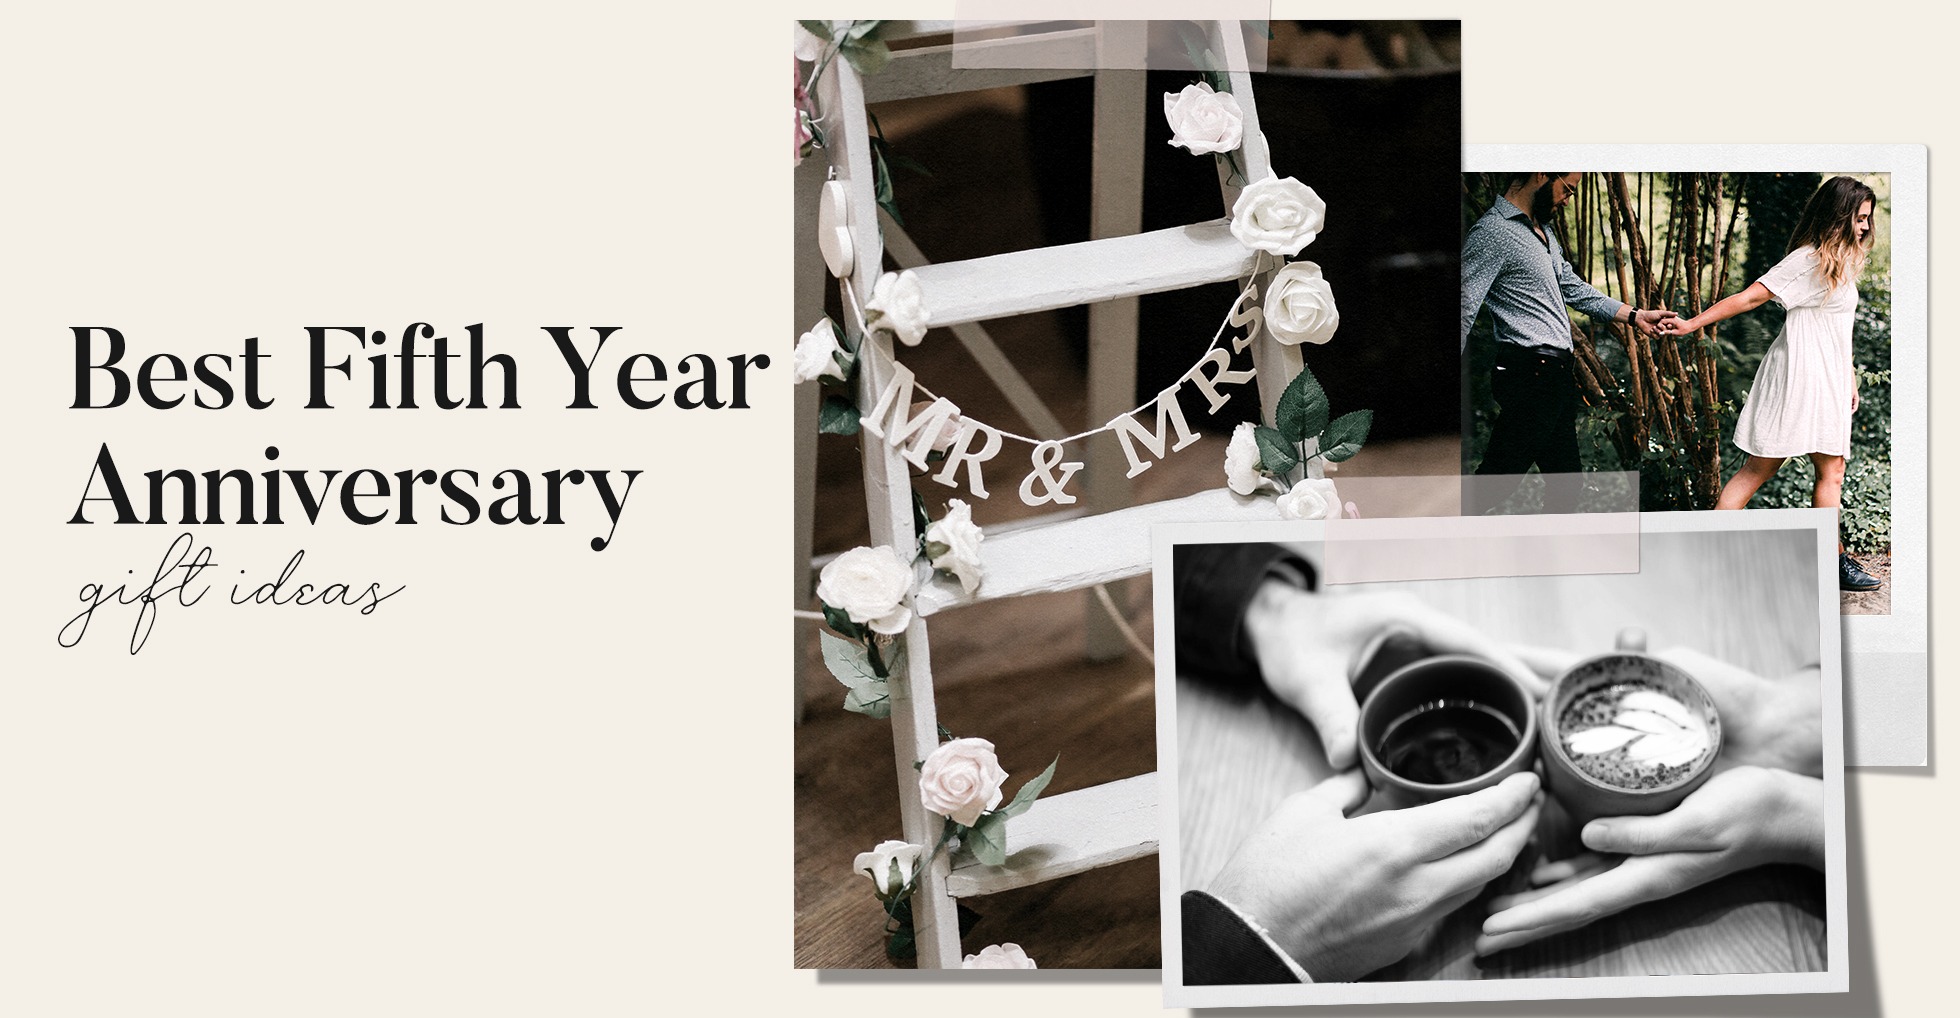 7 Best 5th Year Anniversary Gift Ideas Guide